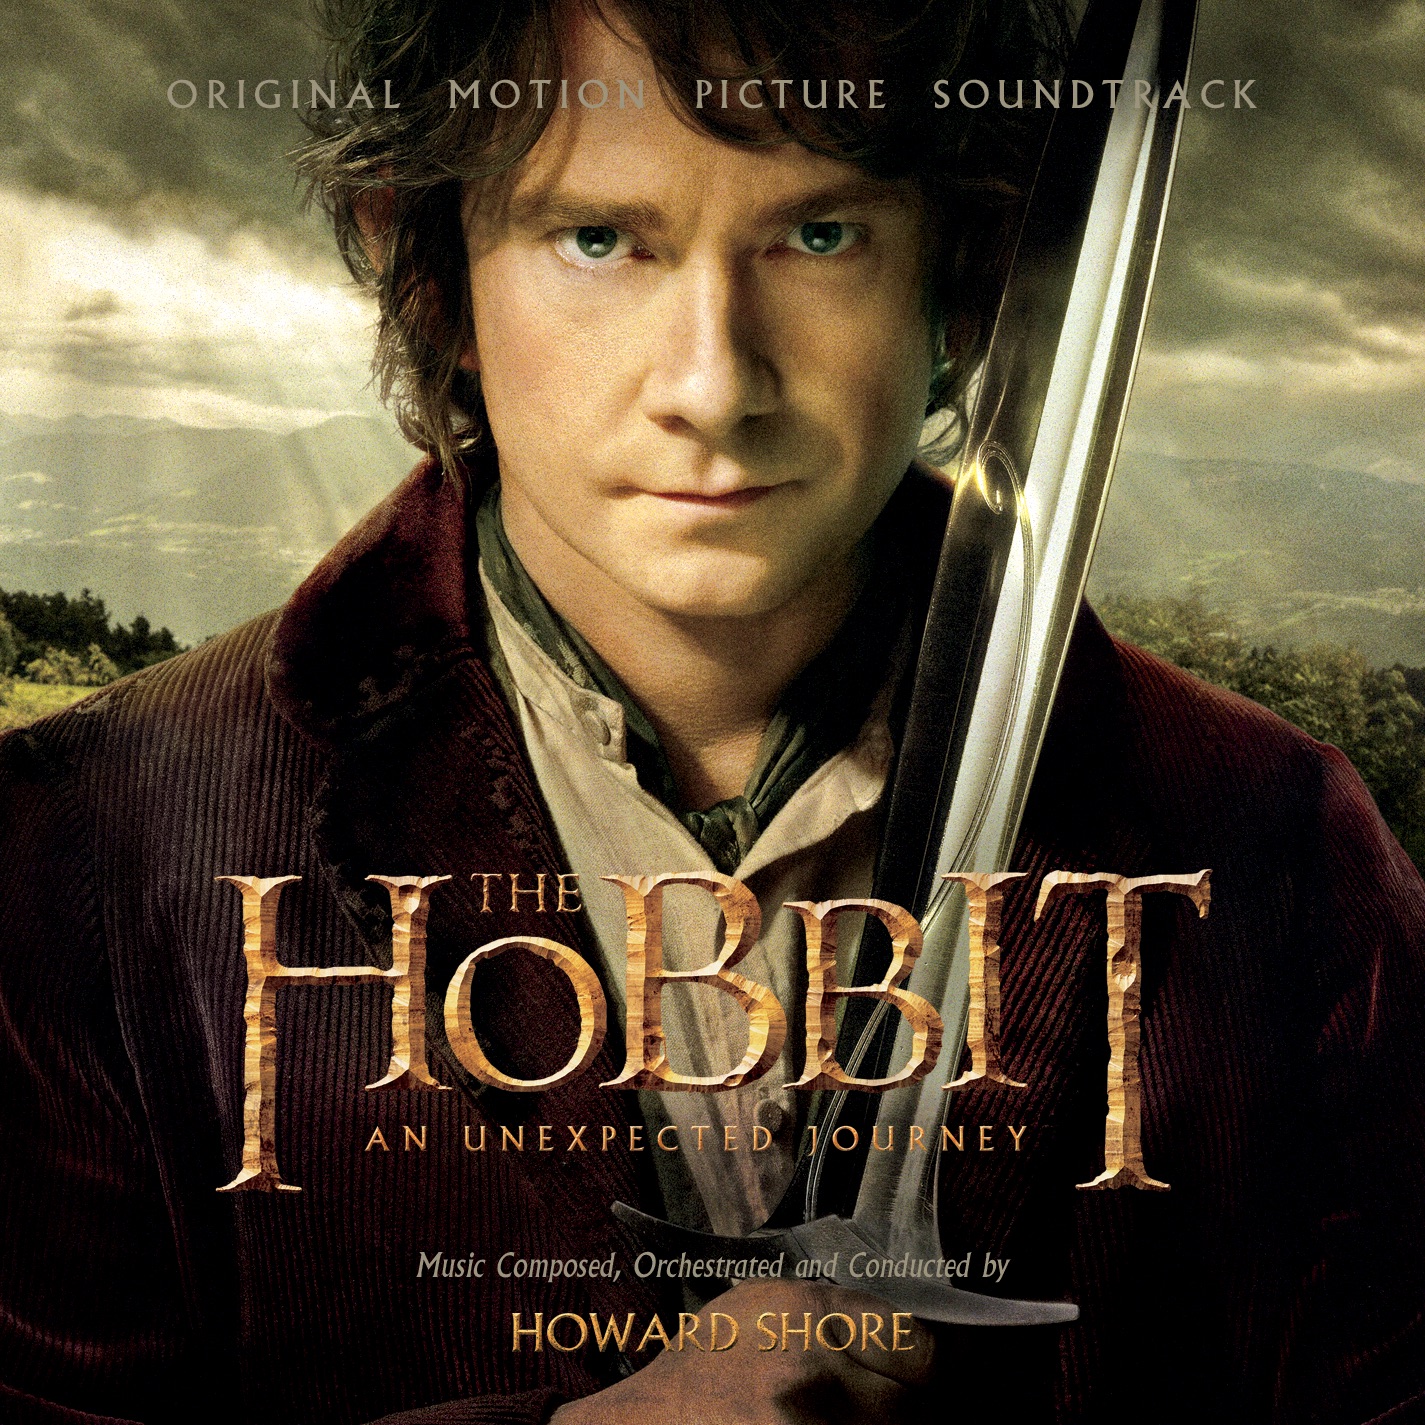 the hobbit an unexpected journey soundtrack misty mountains